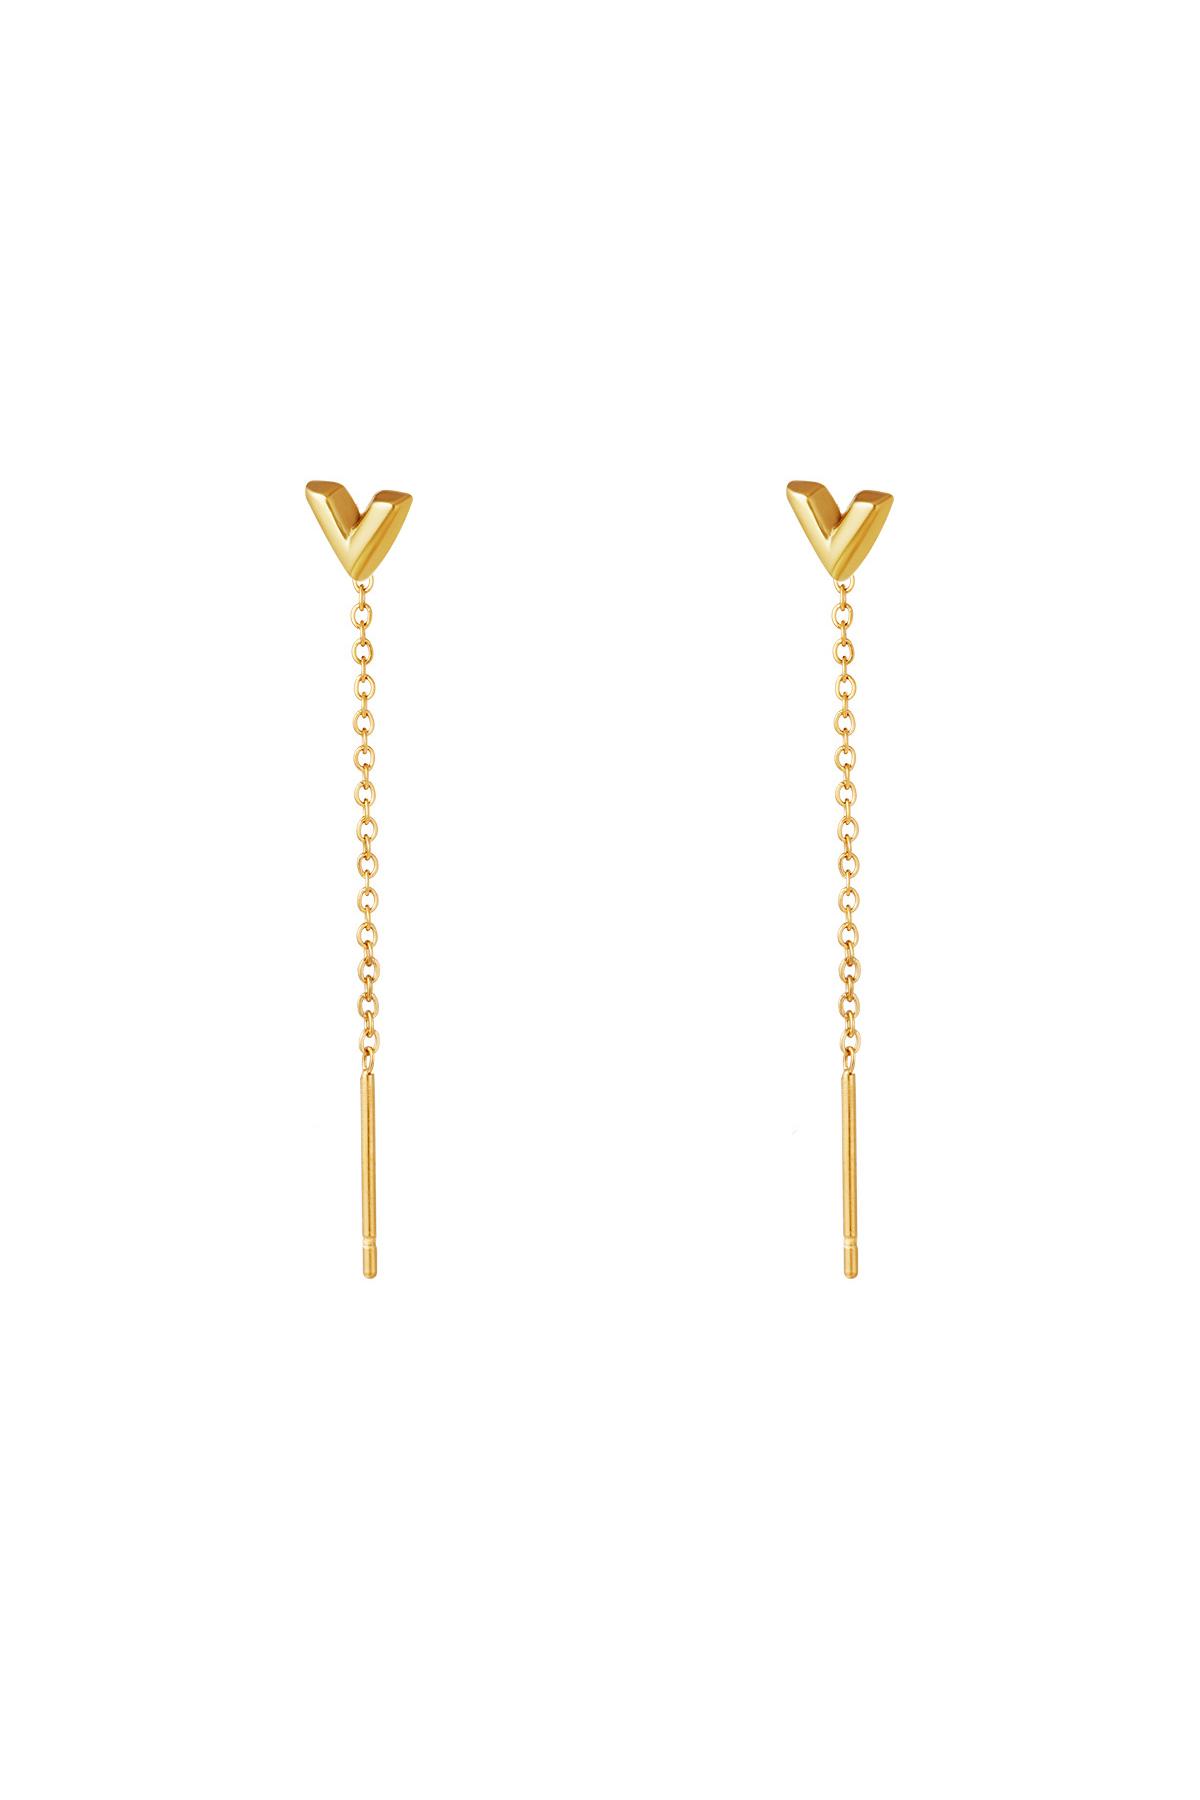 Stainless Steel Chain Earrings Arrow Gold h5 